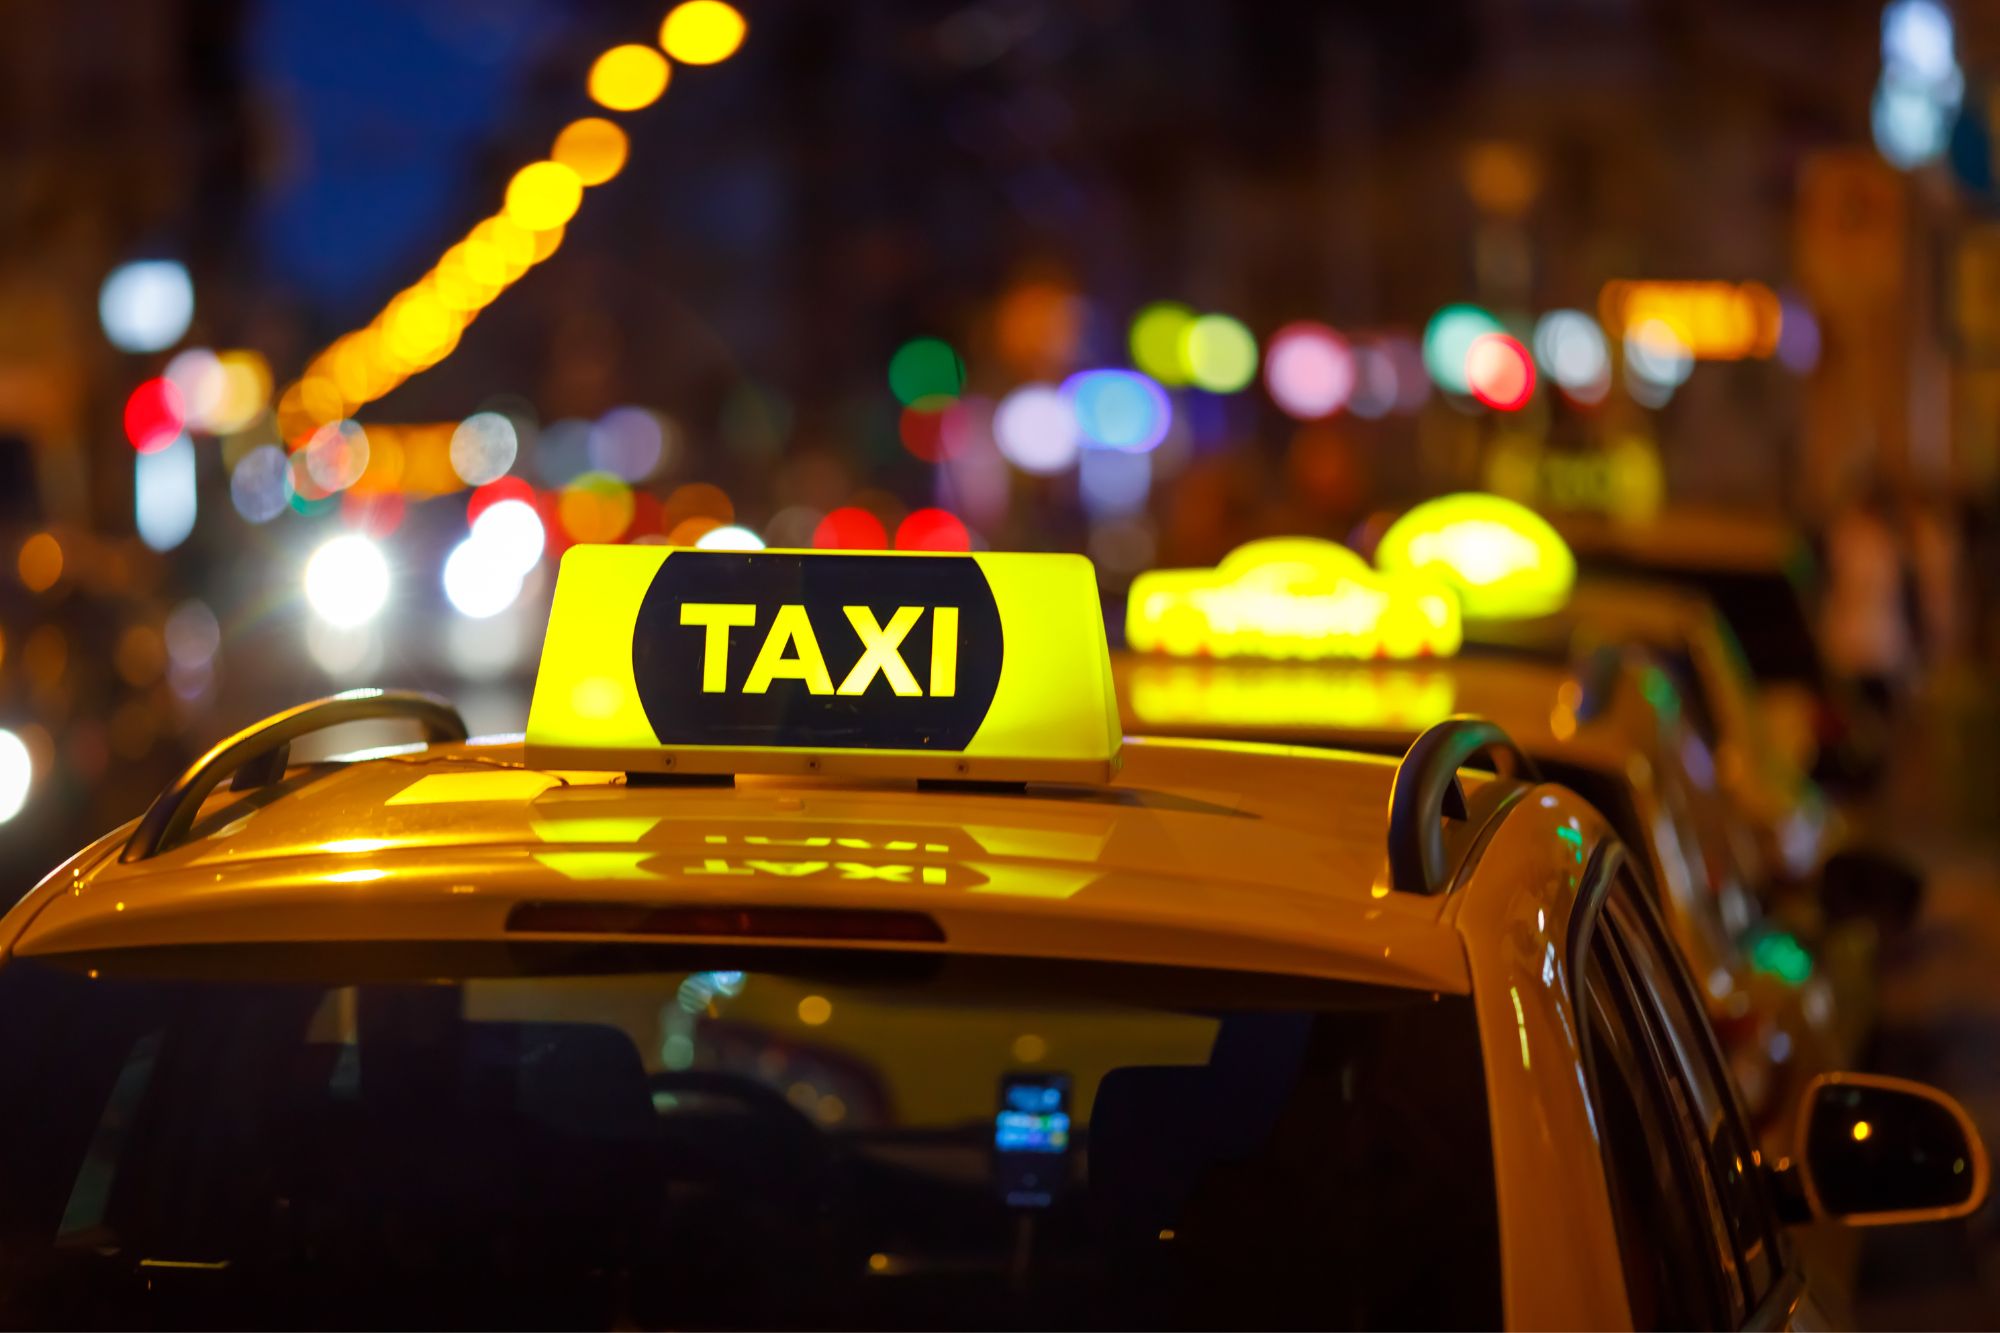 New Business Funding Product from Tax Traders – TAXI